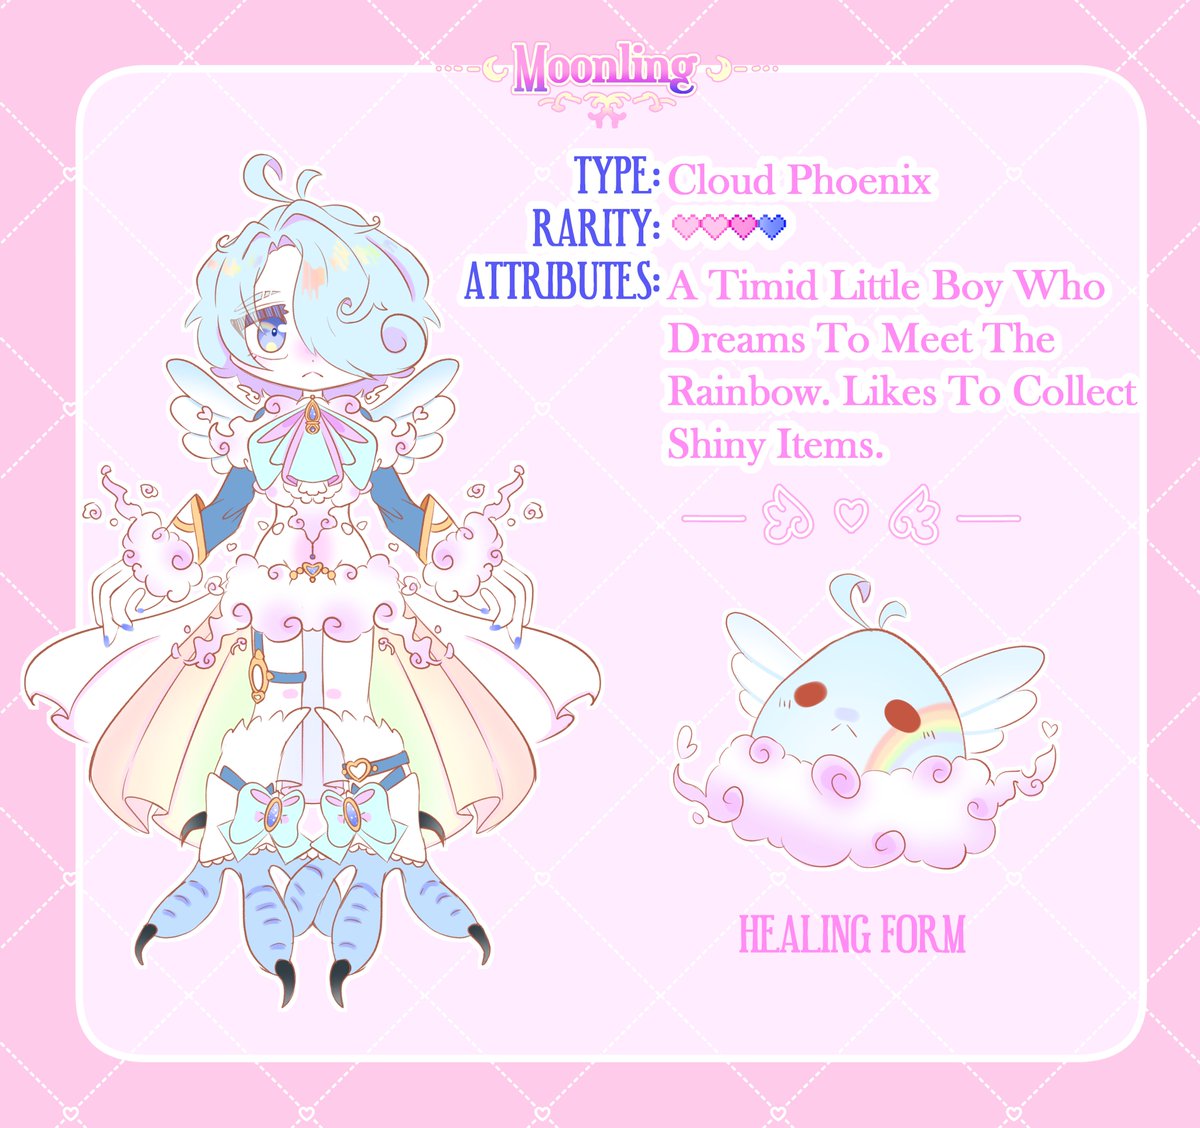 Meet my new OC, Niji!!! (he/him) He was designed for @FIYUNAE moonling event!!! Had a lot of fun designing him!!! 🌈☁️